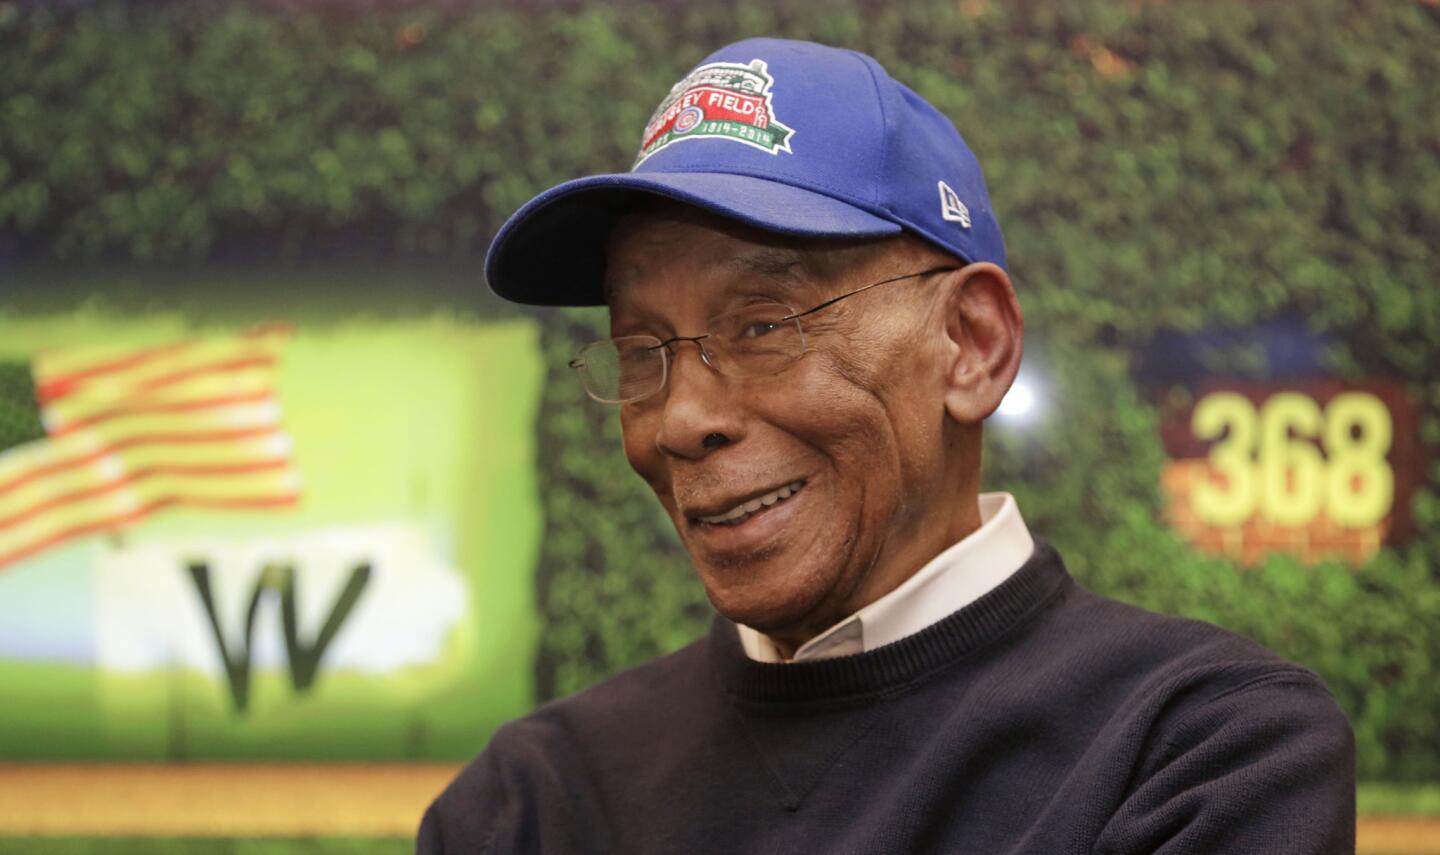 Ernie Banks talks during an interview at Wrigley Field in March 2014.